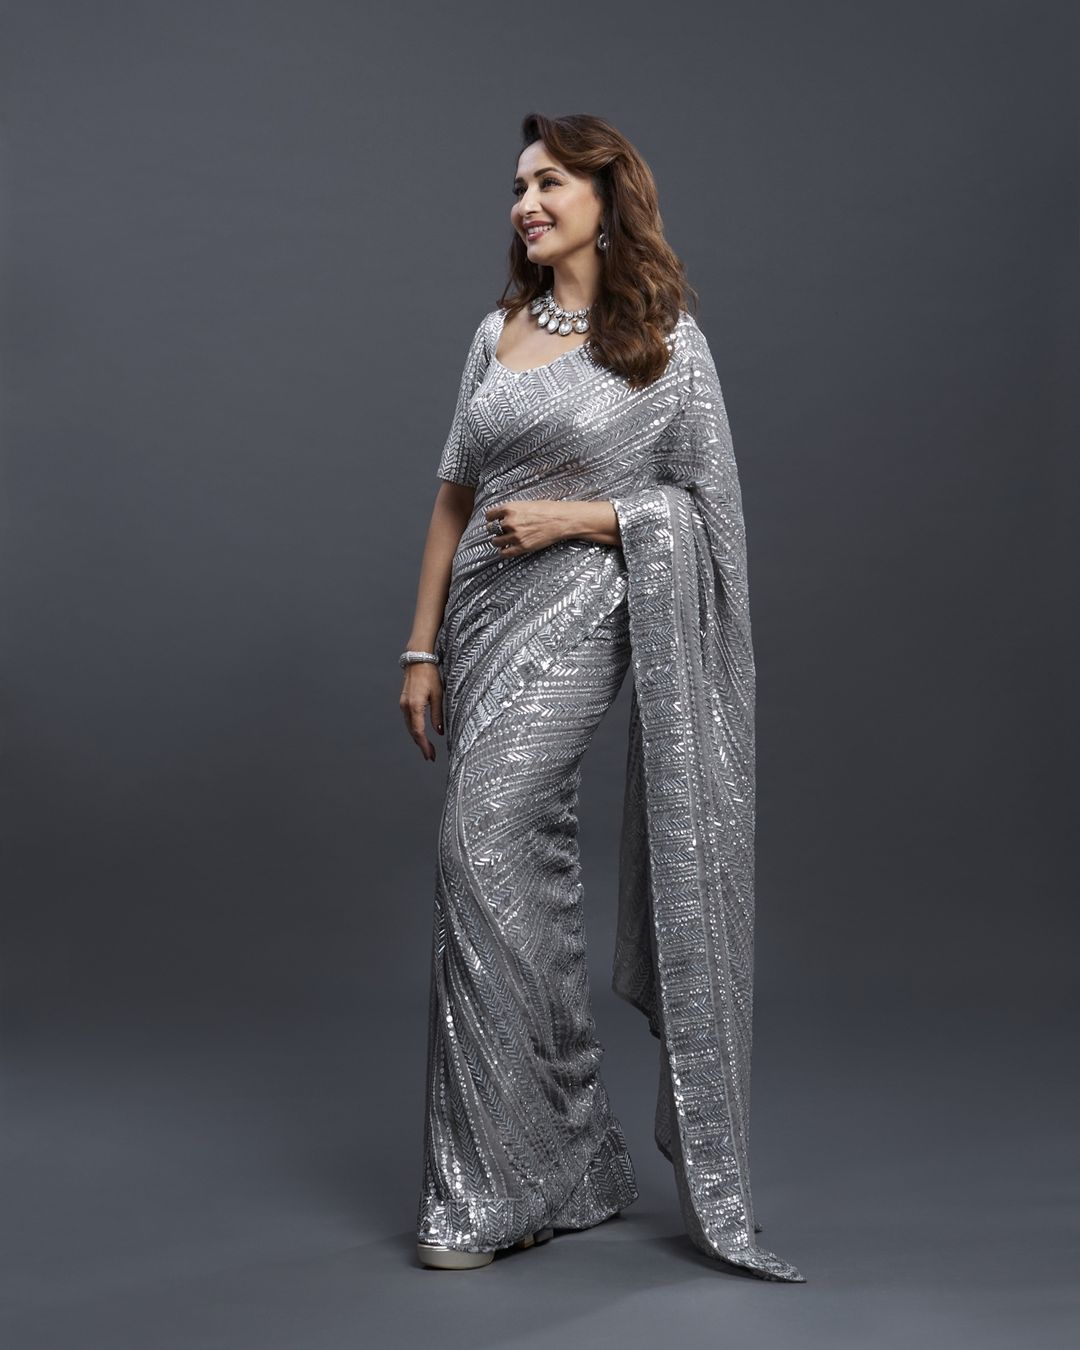  Madhuri Dixit Nene looks graceful in the sequinned silver saree. (Image: Instagram)